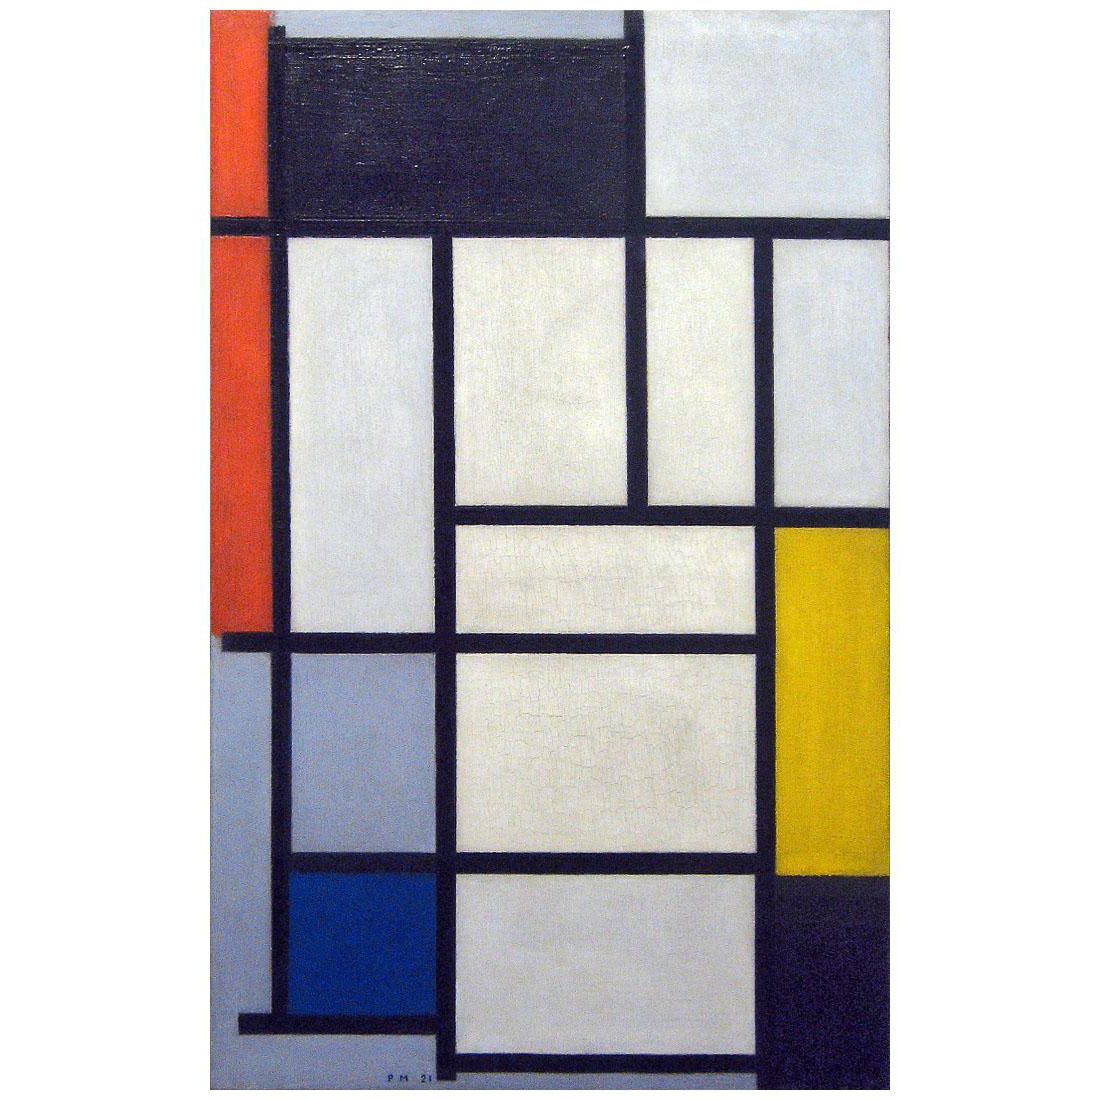 Piet Mondriaan. Composition with Red, Blue, Black, Yellow and Gray. 1921. GM Den Haag